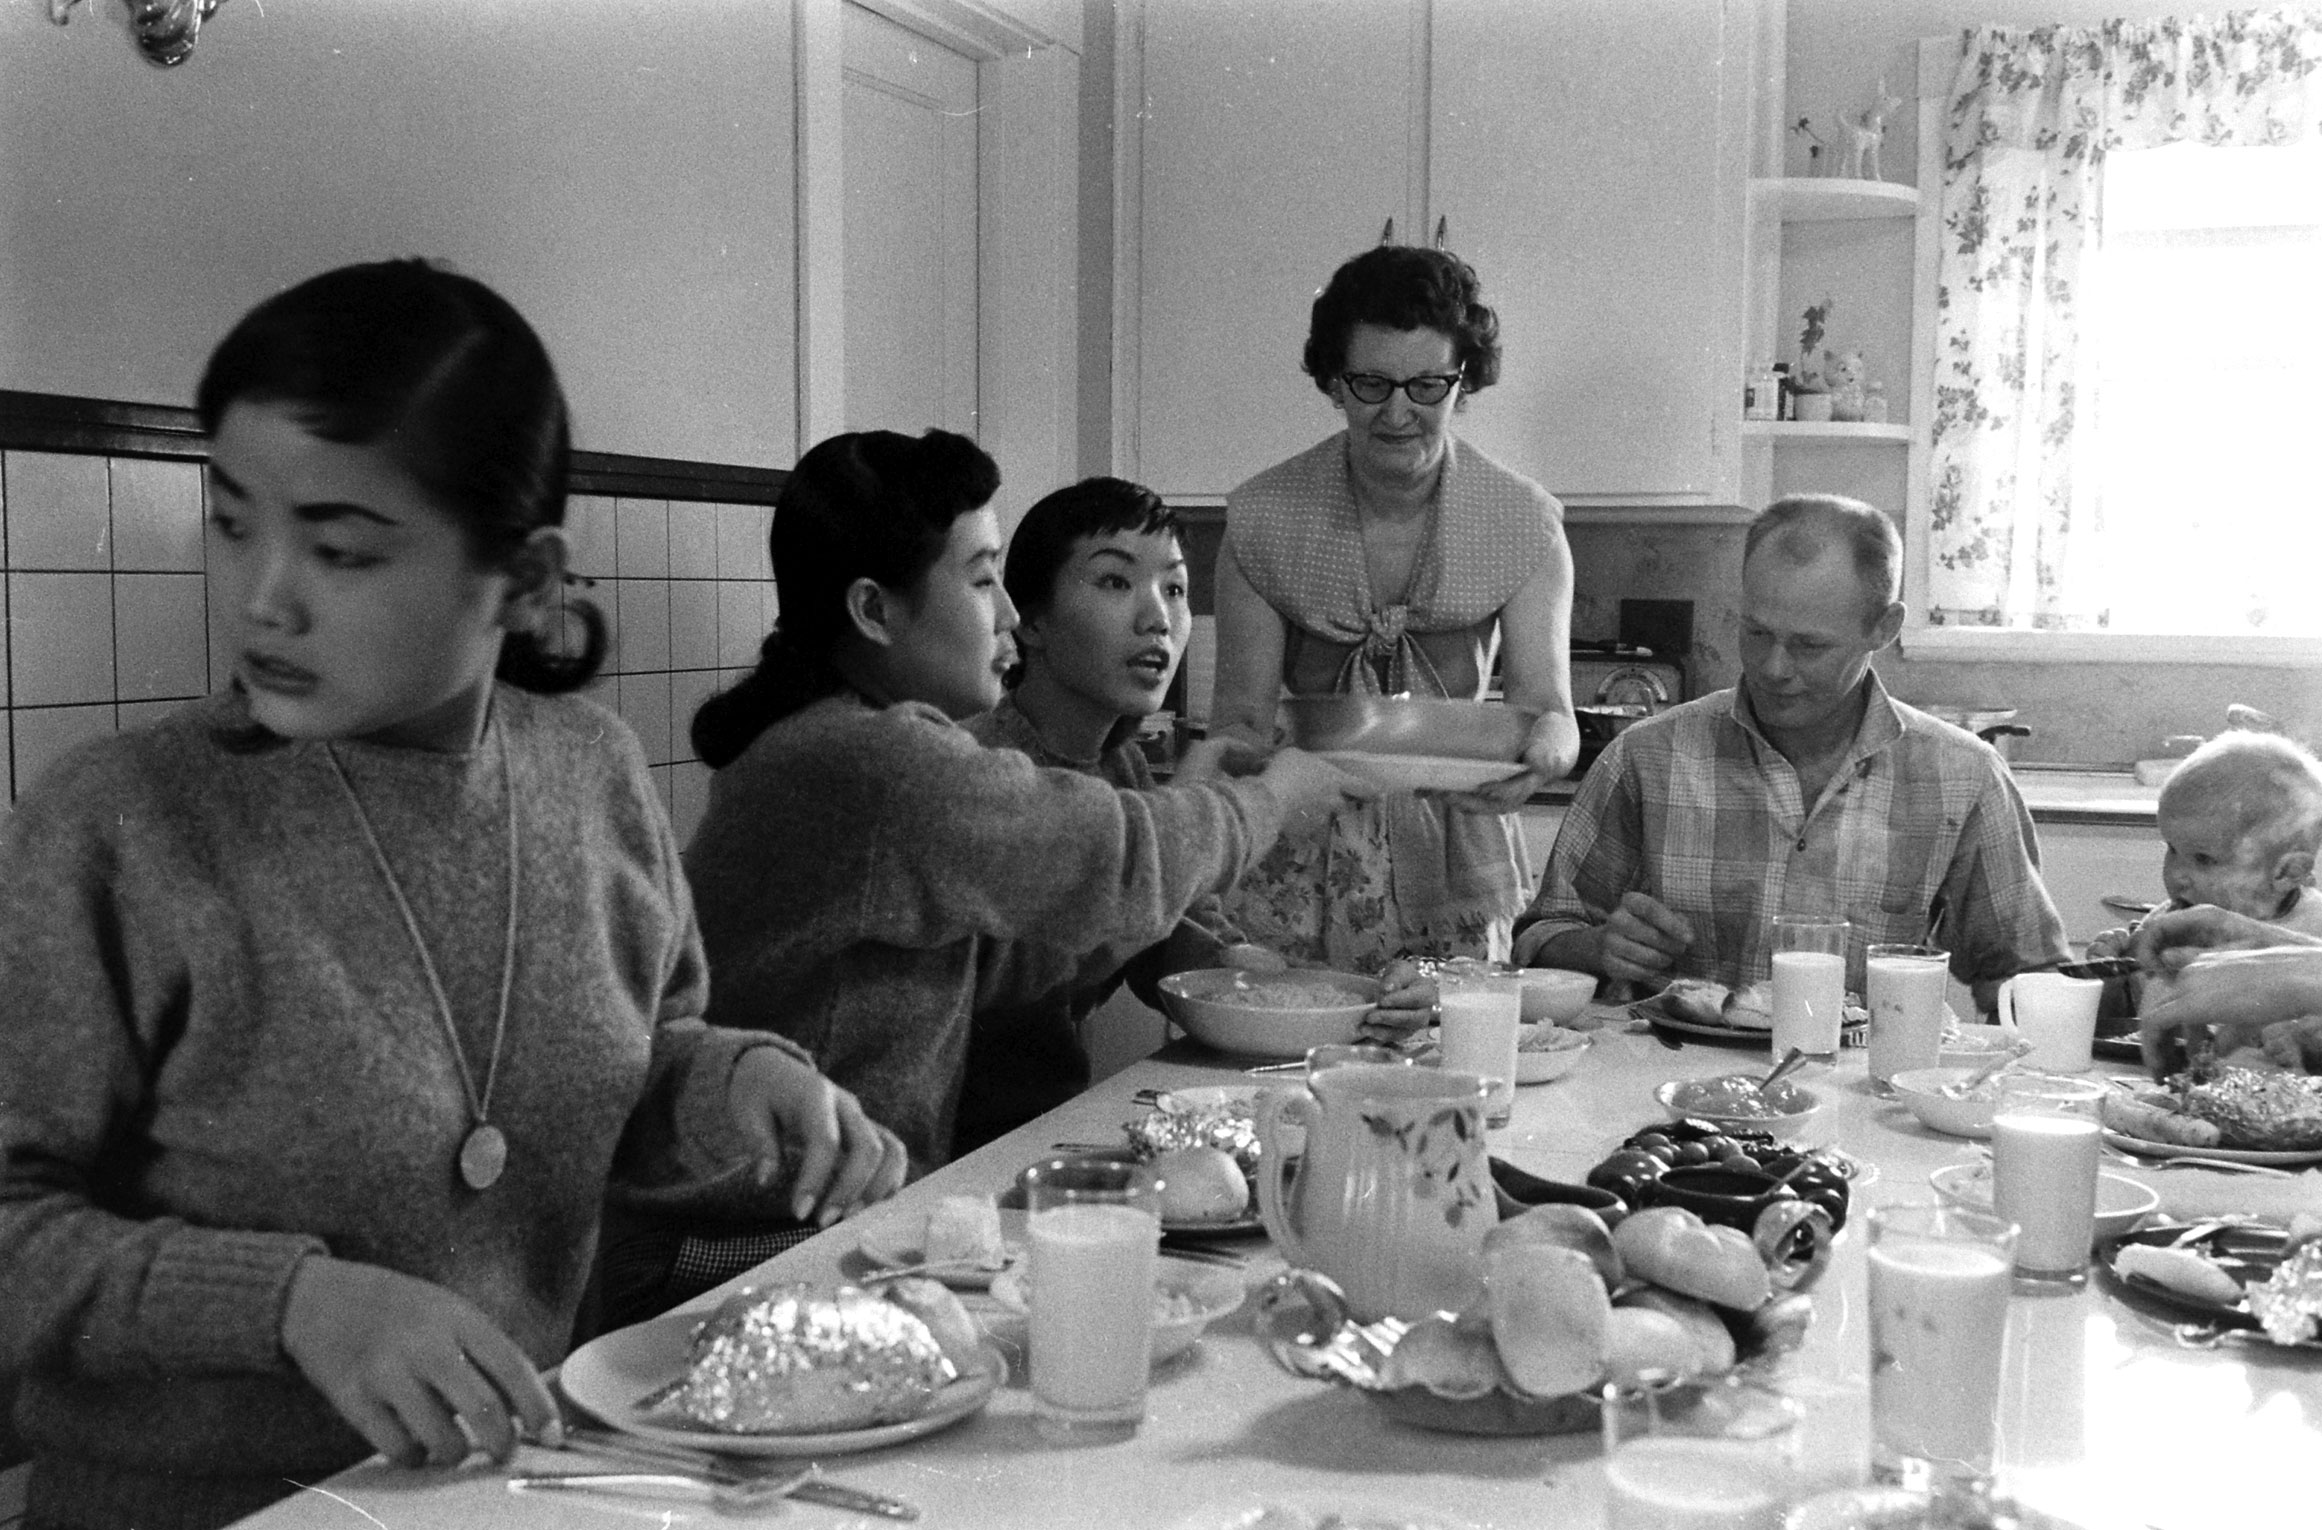 Kim Sisters with their manager's family, Illinois, 1960.